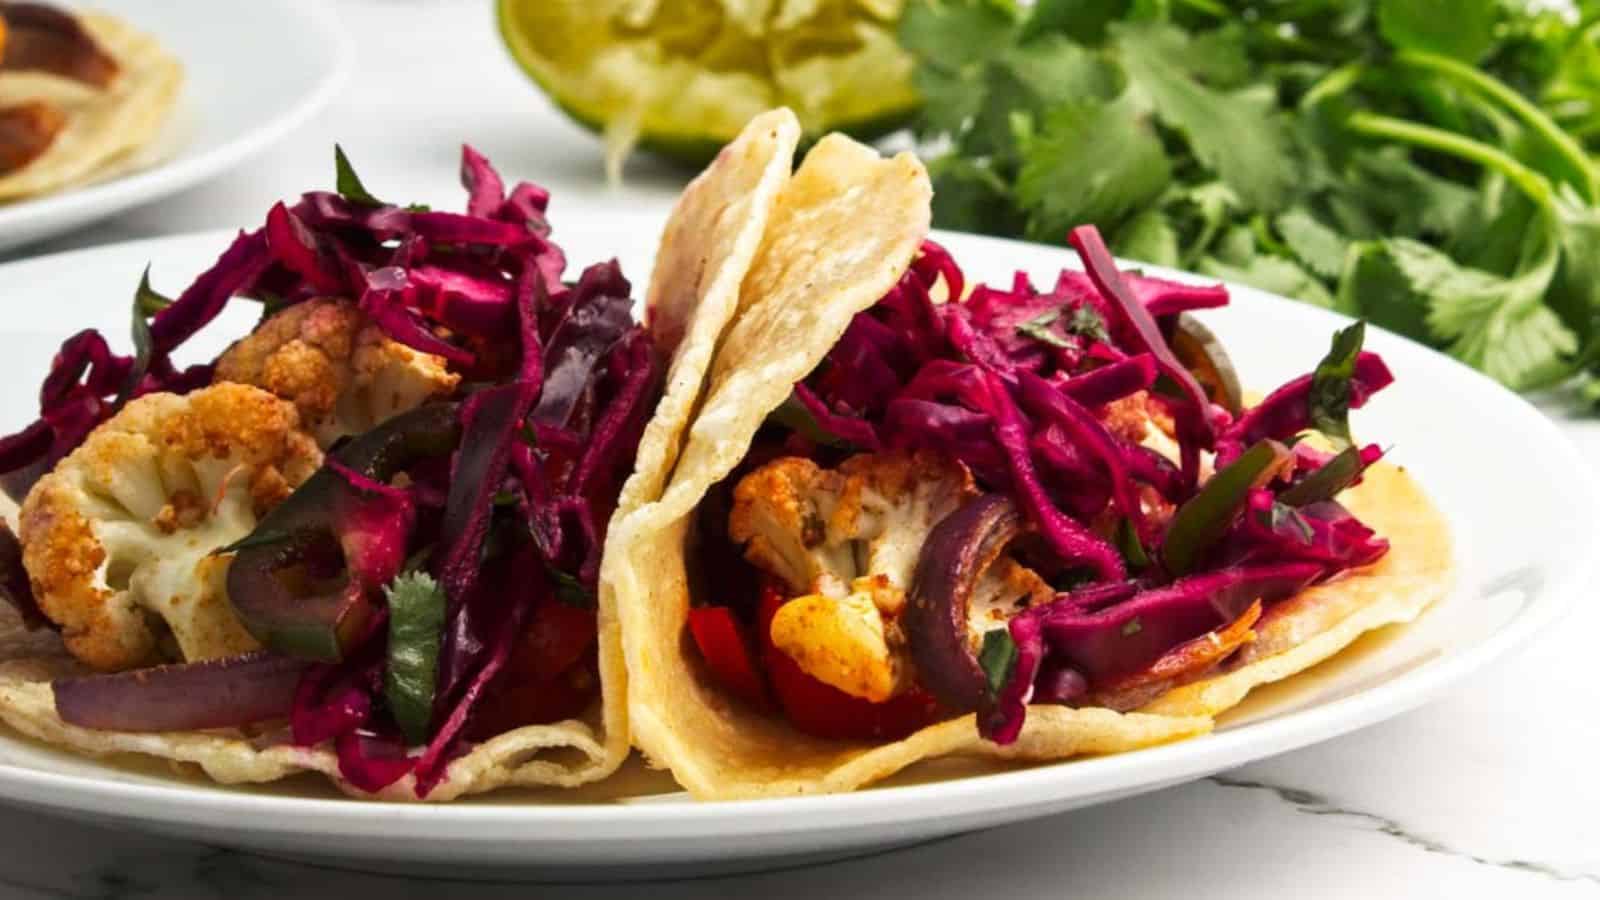 A plate of tacos with red cabbage and cauliflower slaw.